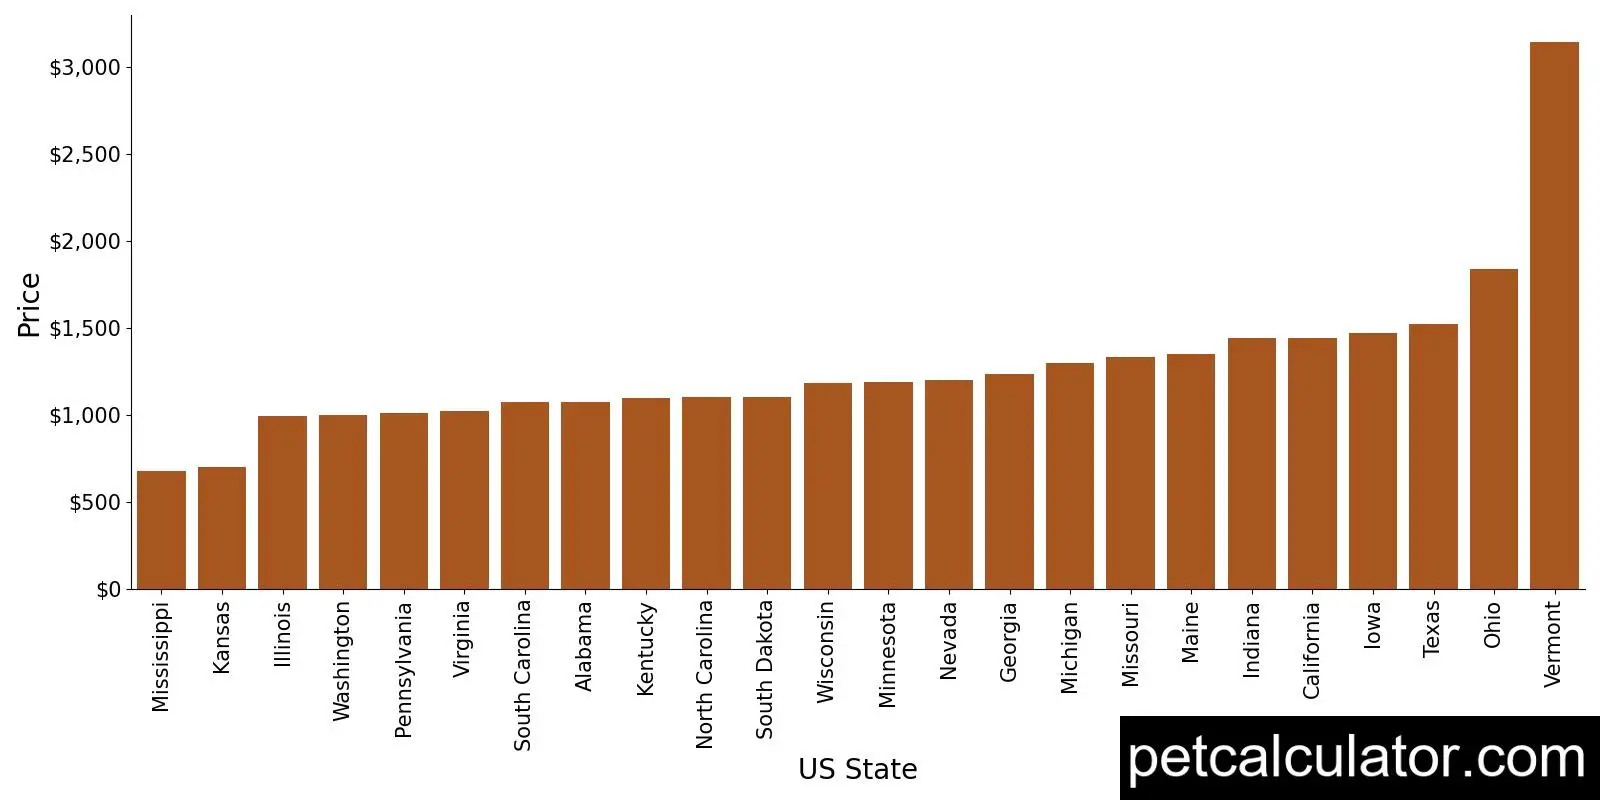 Price of English Springer Spaniel by US State 